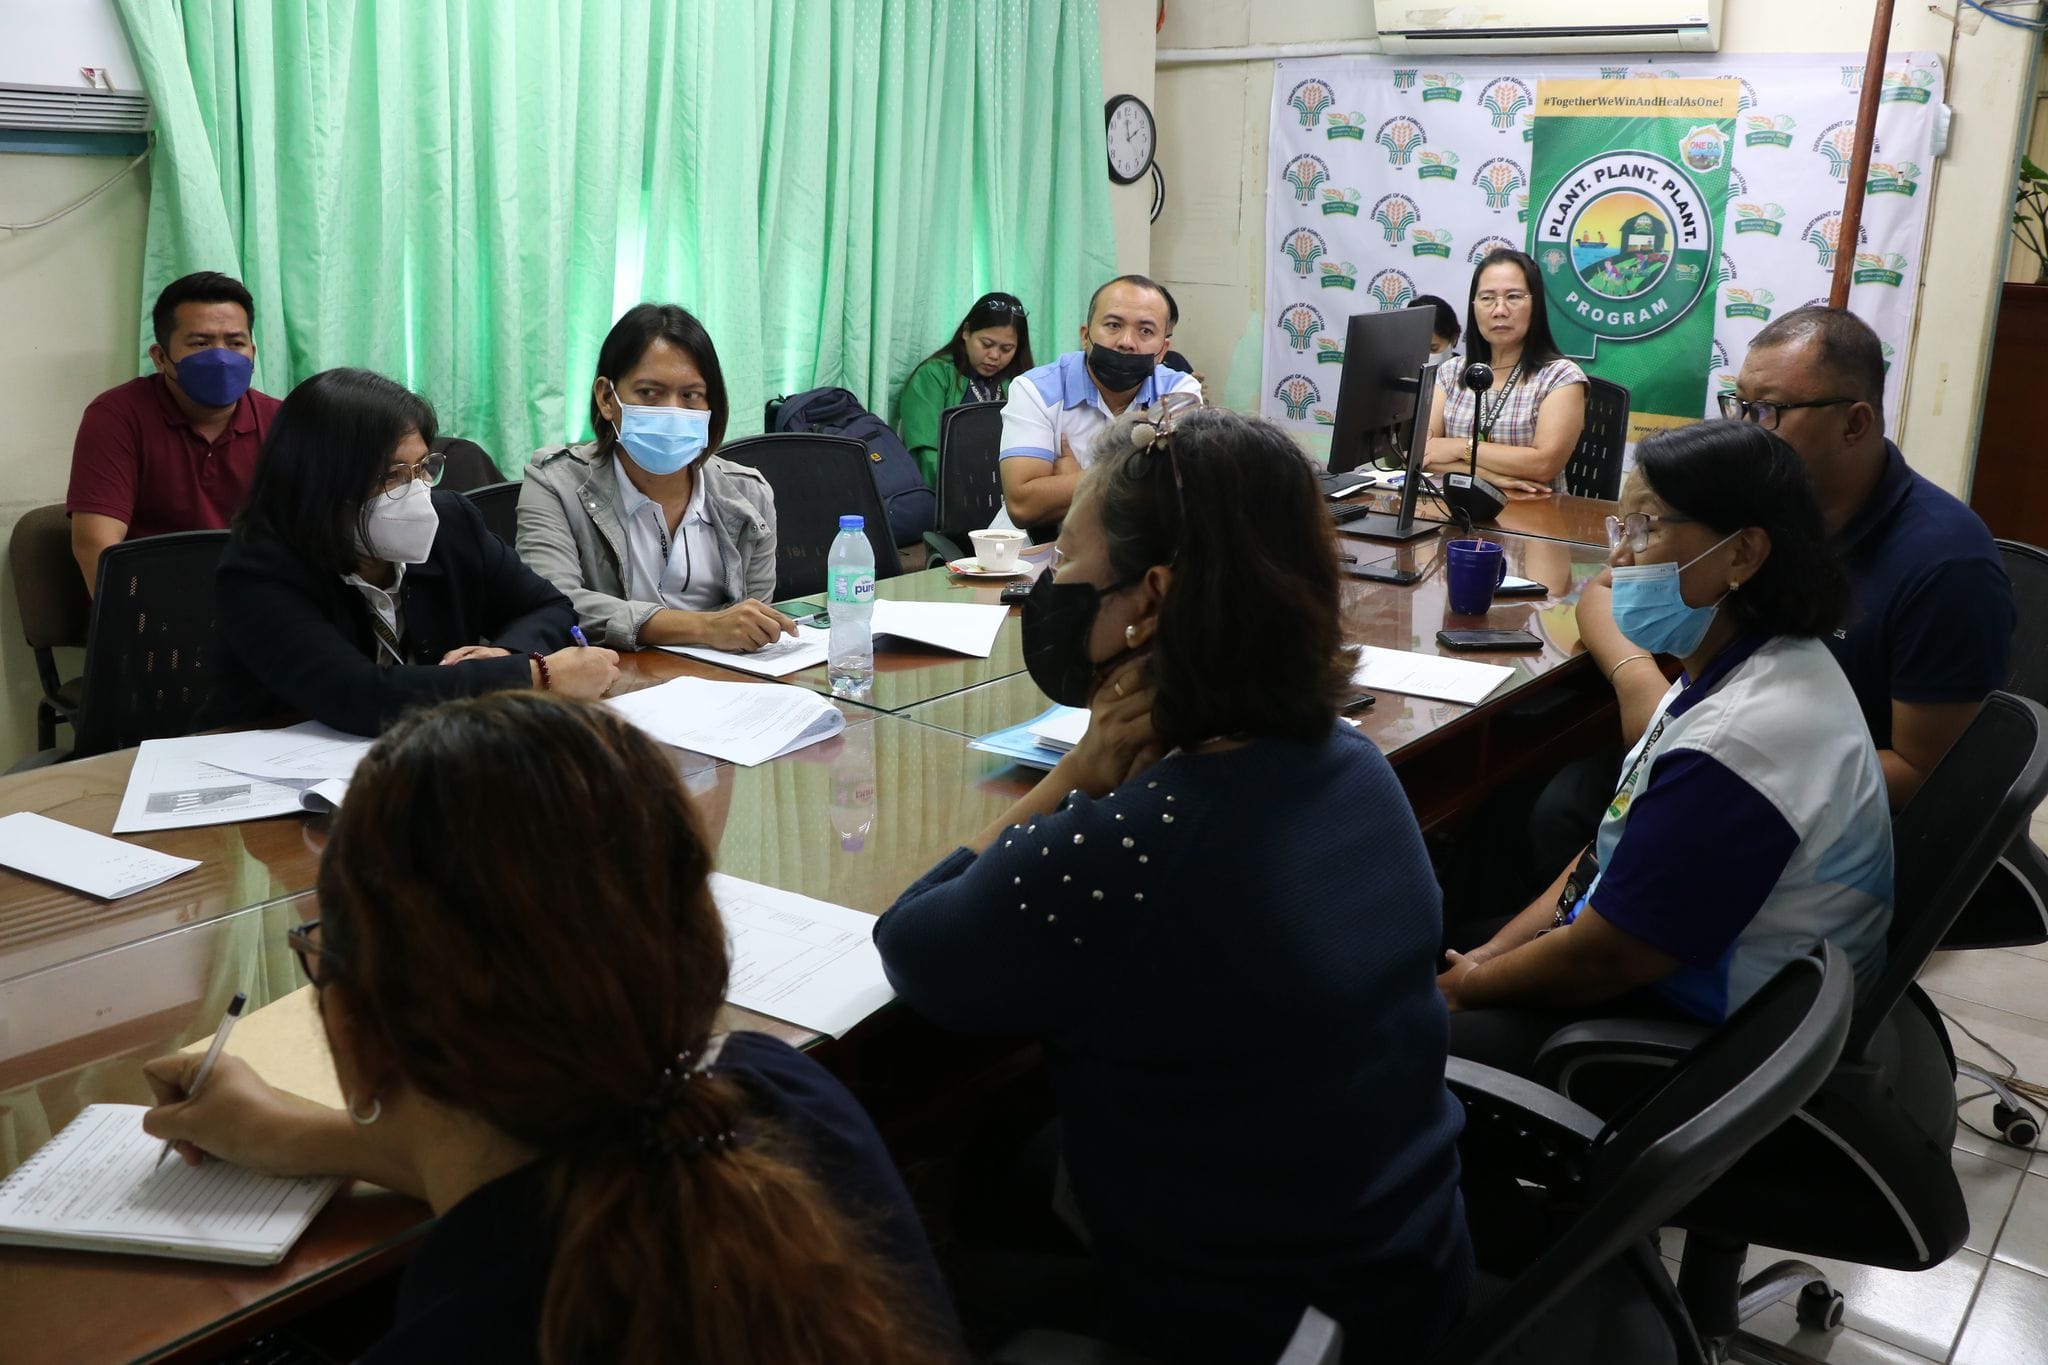 Agri 10 conducts meeting with DA-Central Office budget officers, site visit to its new building